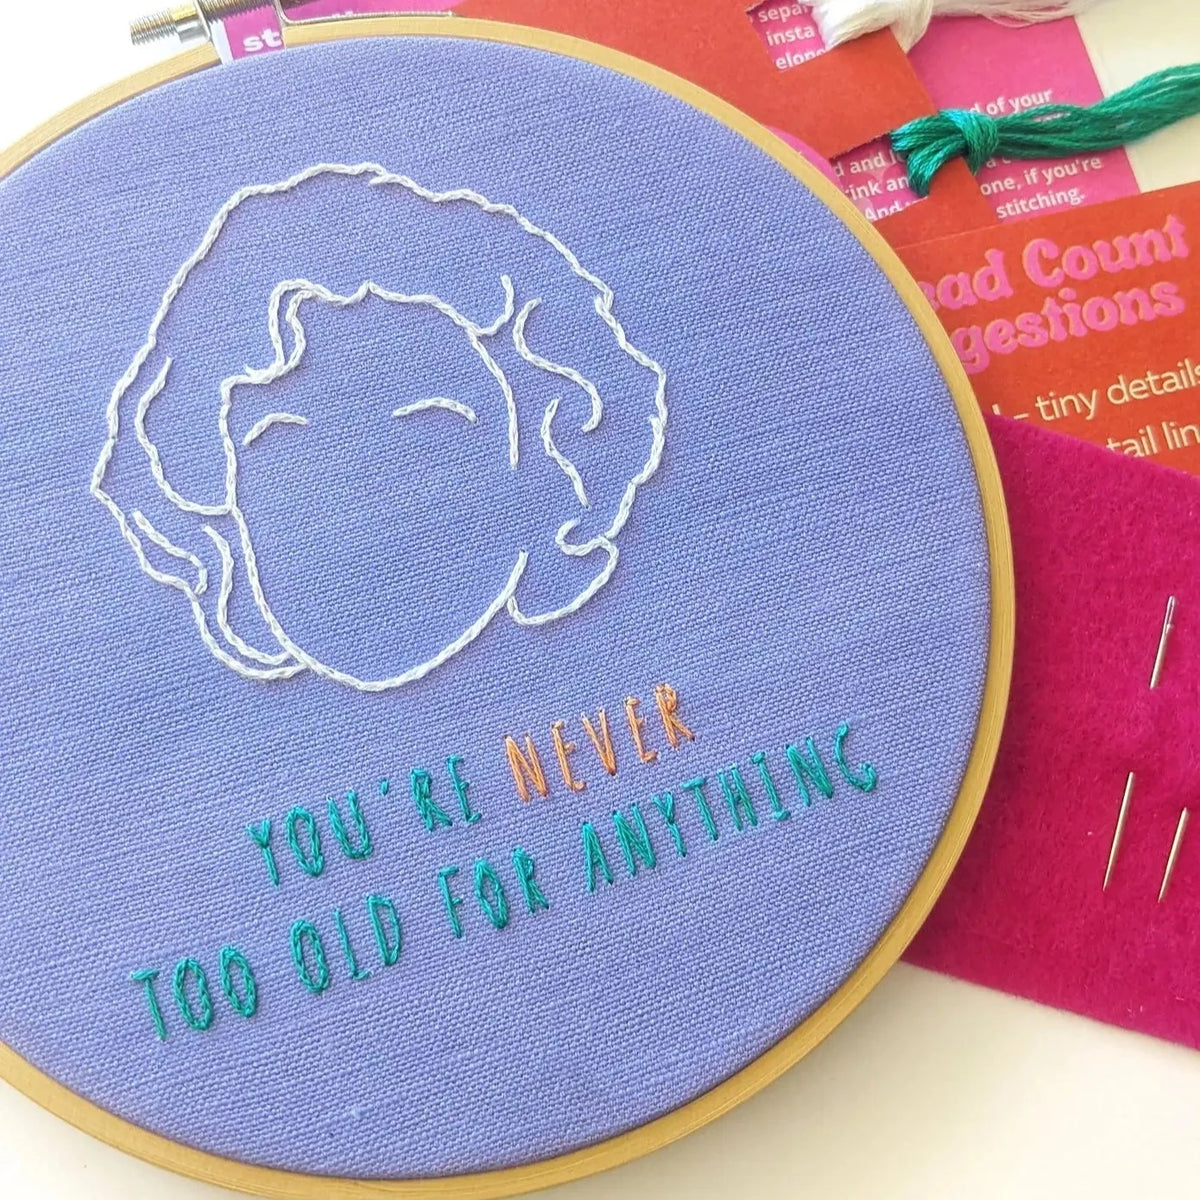 Betty White Embroidery Kit